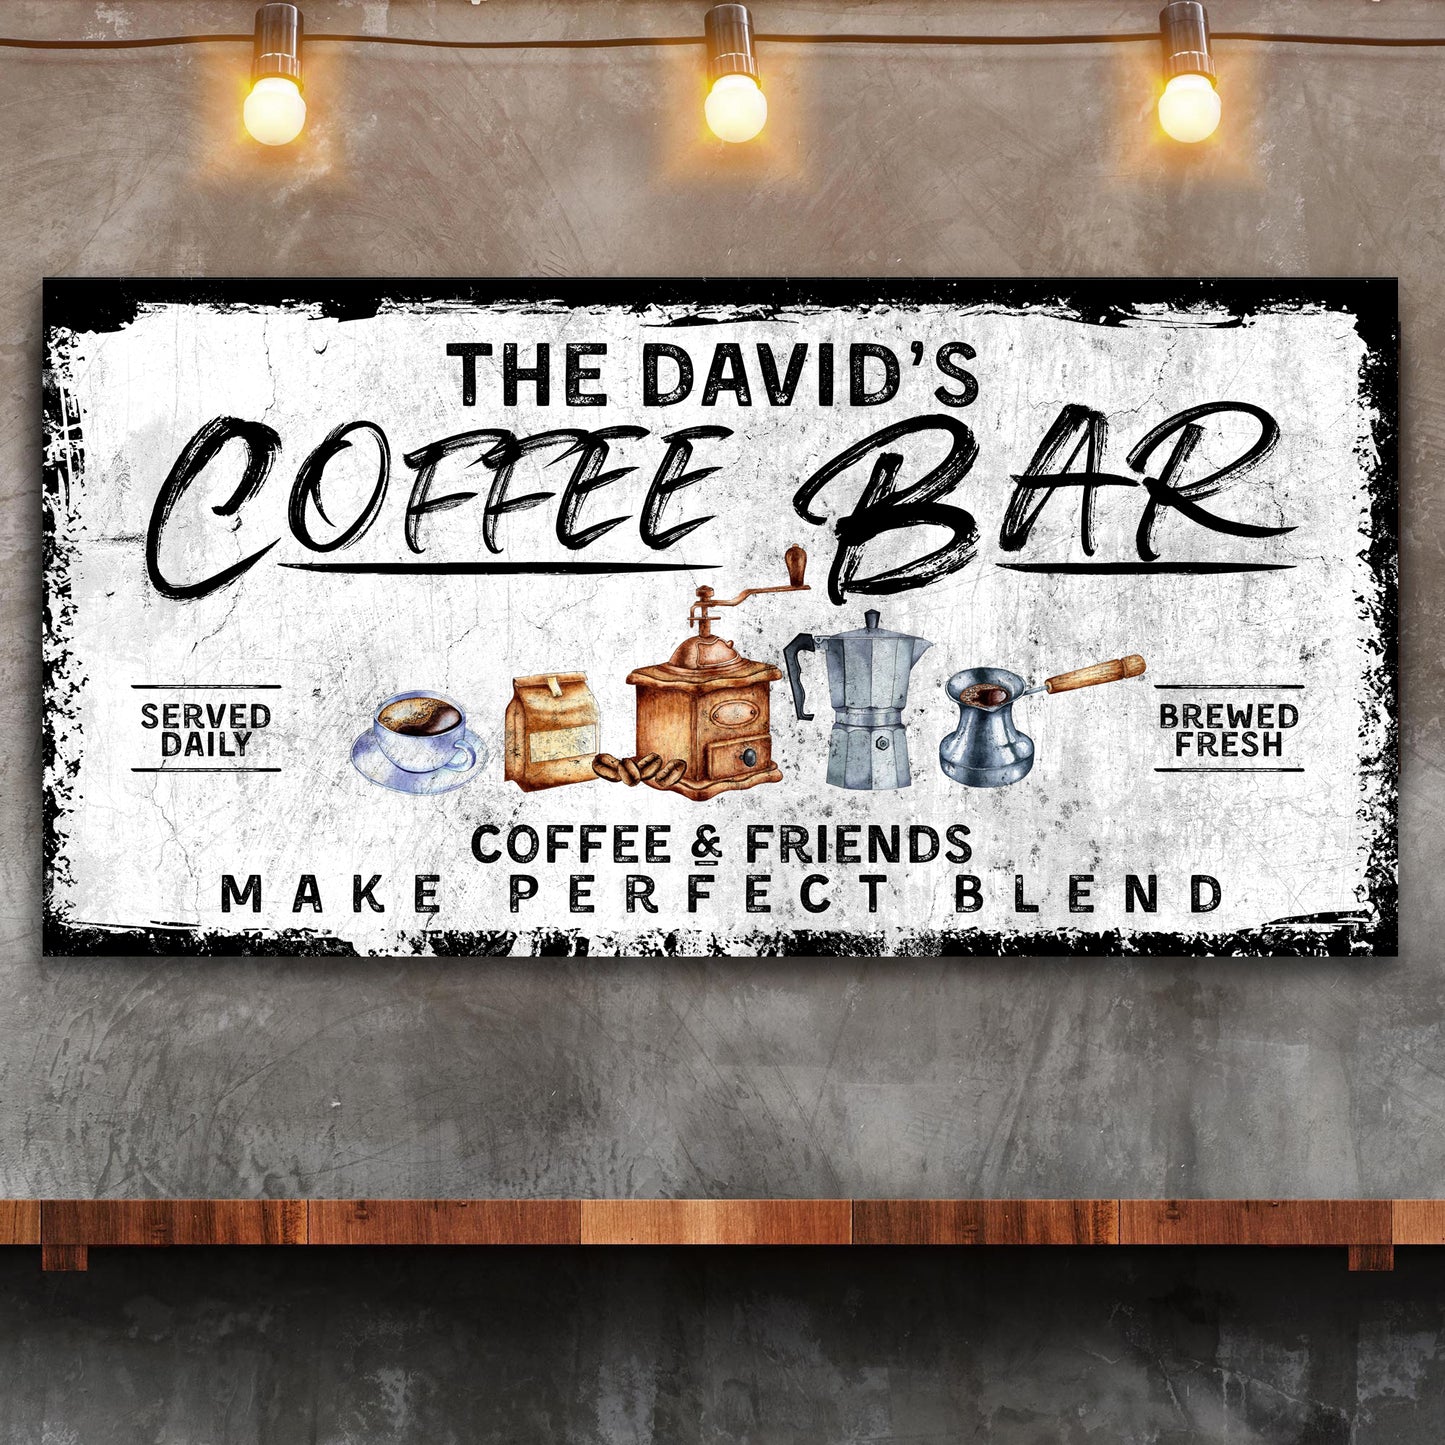 Coffee And Friends' Coffee Bar Sign - Image by Tailored Canvases